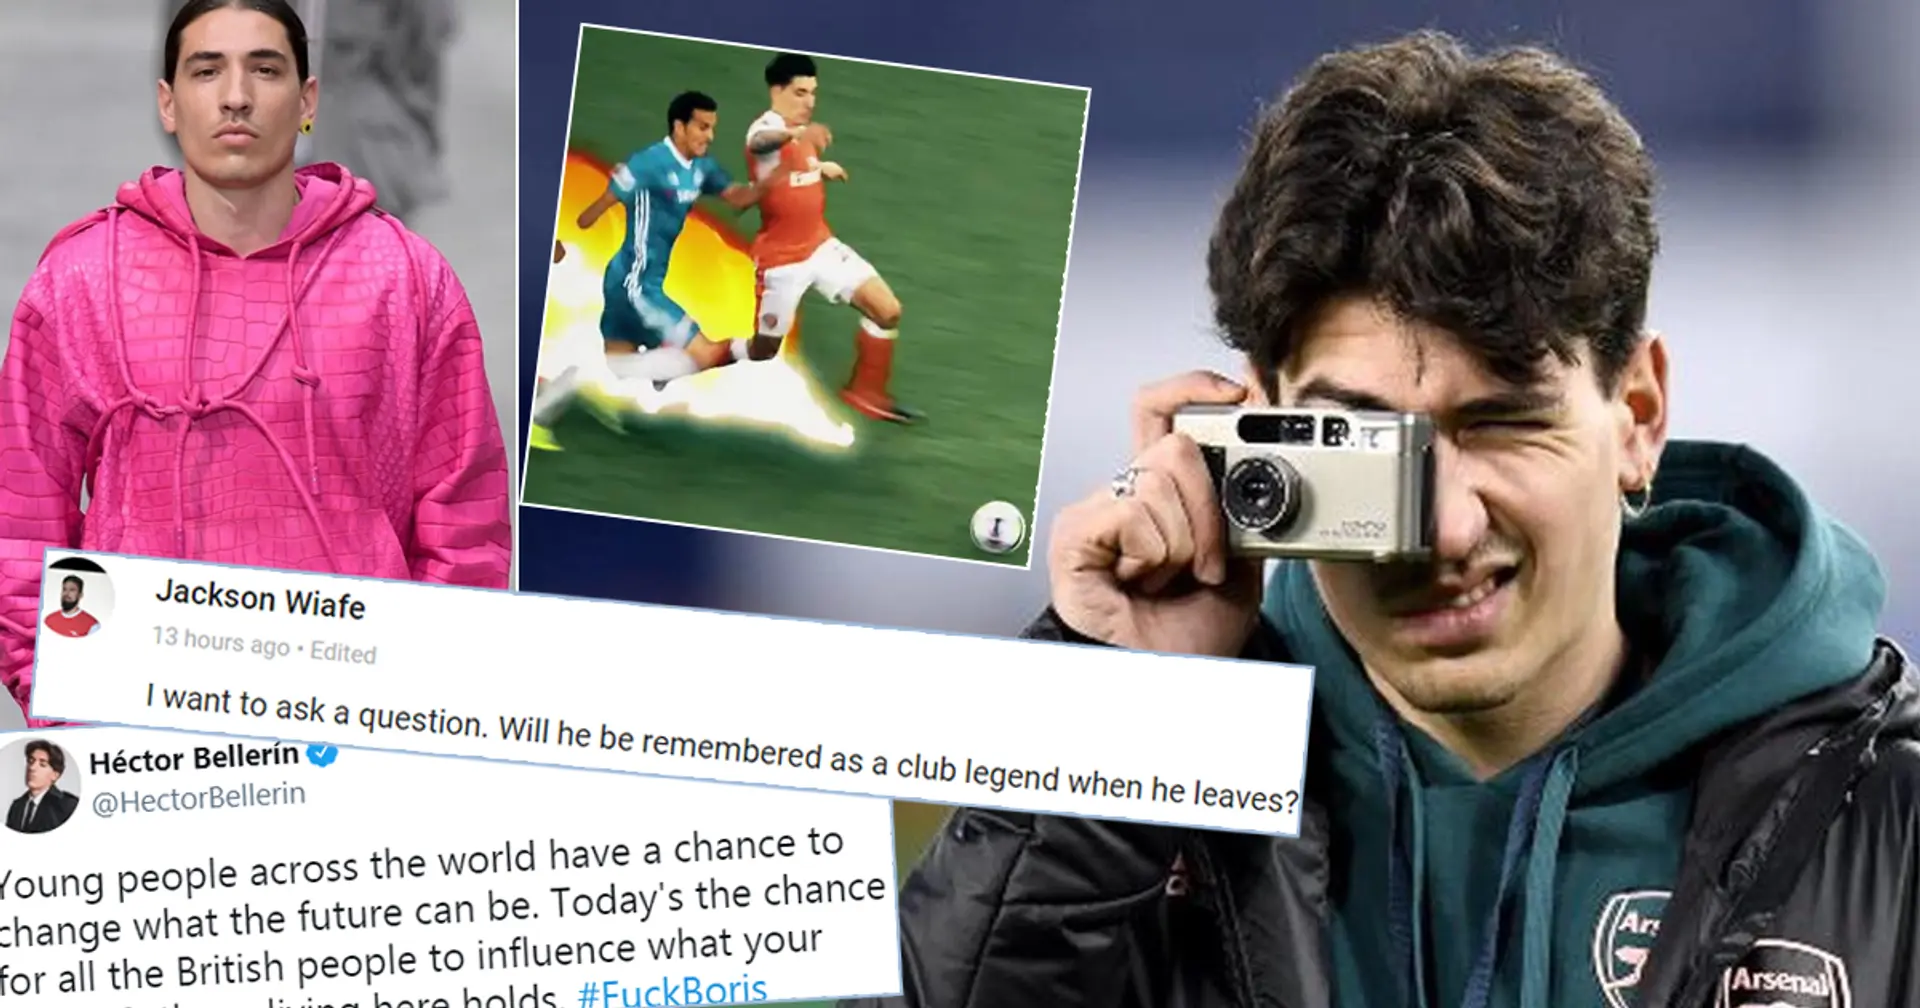 Hector Bellerin will not be an Arsenal legend but his complex legacy will still live on